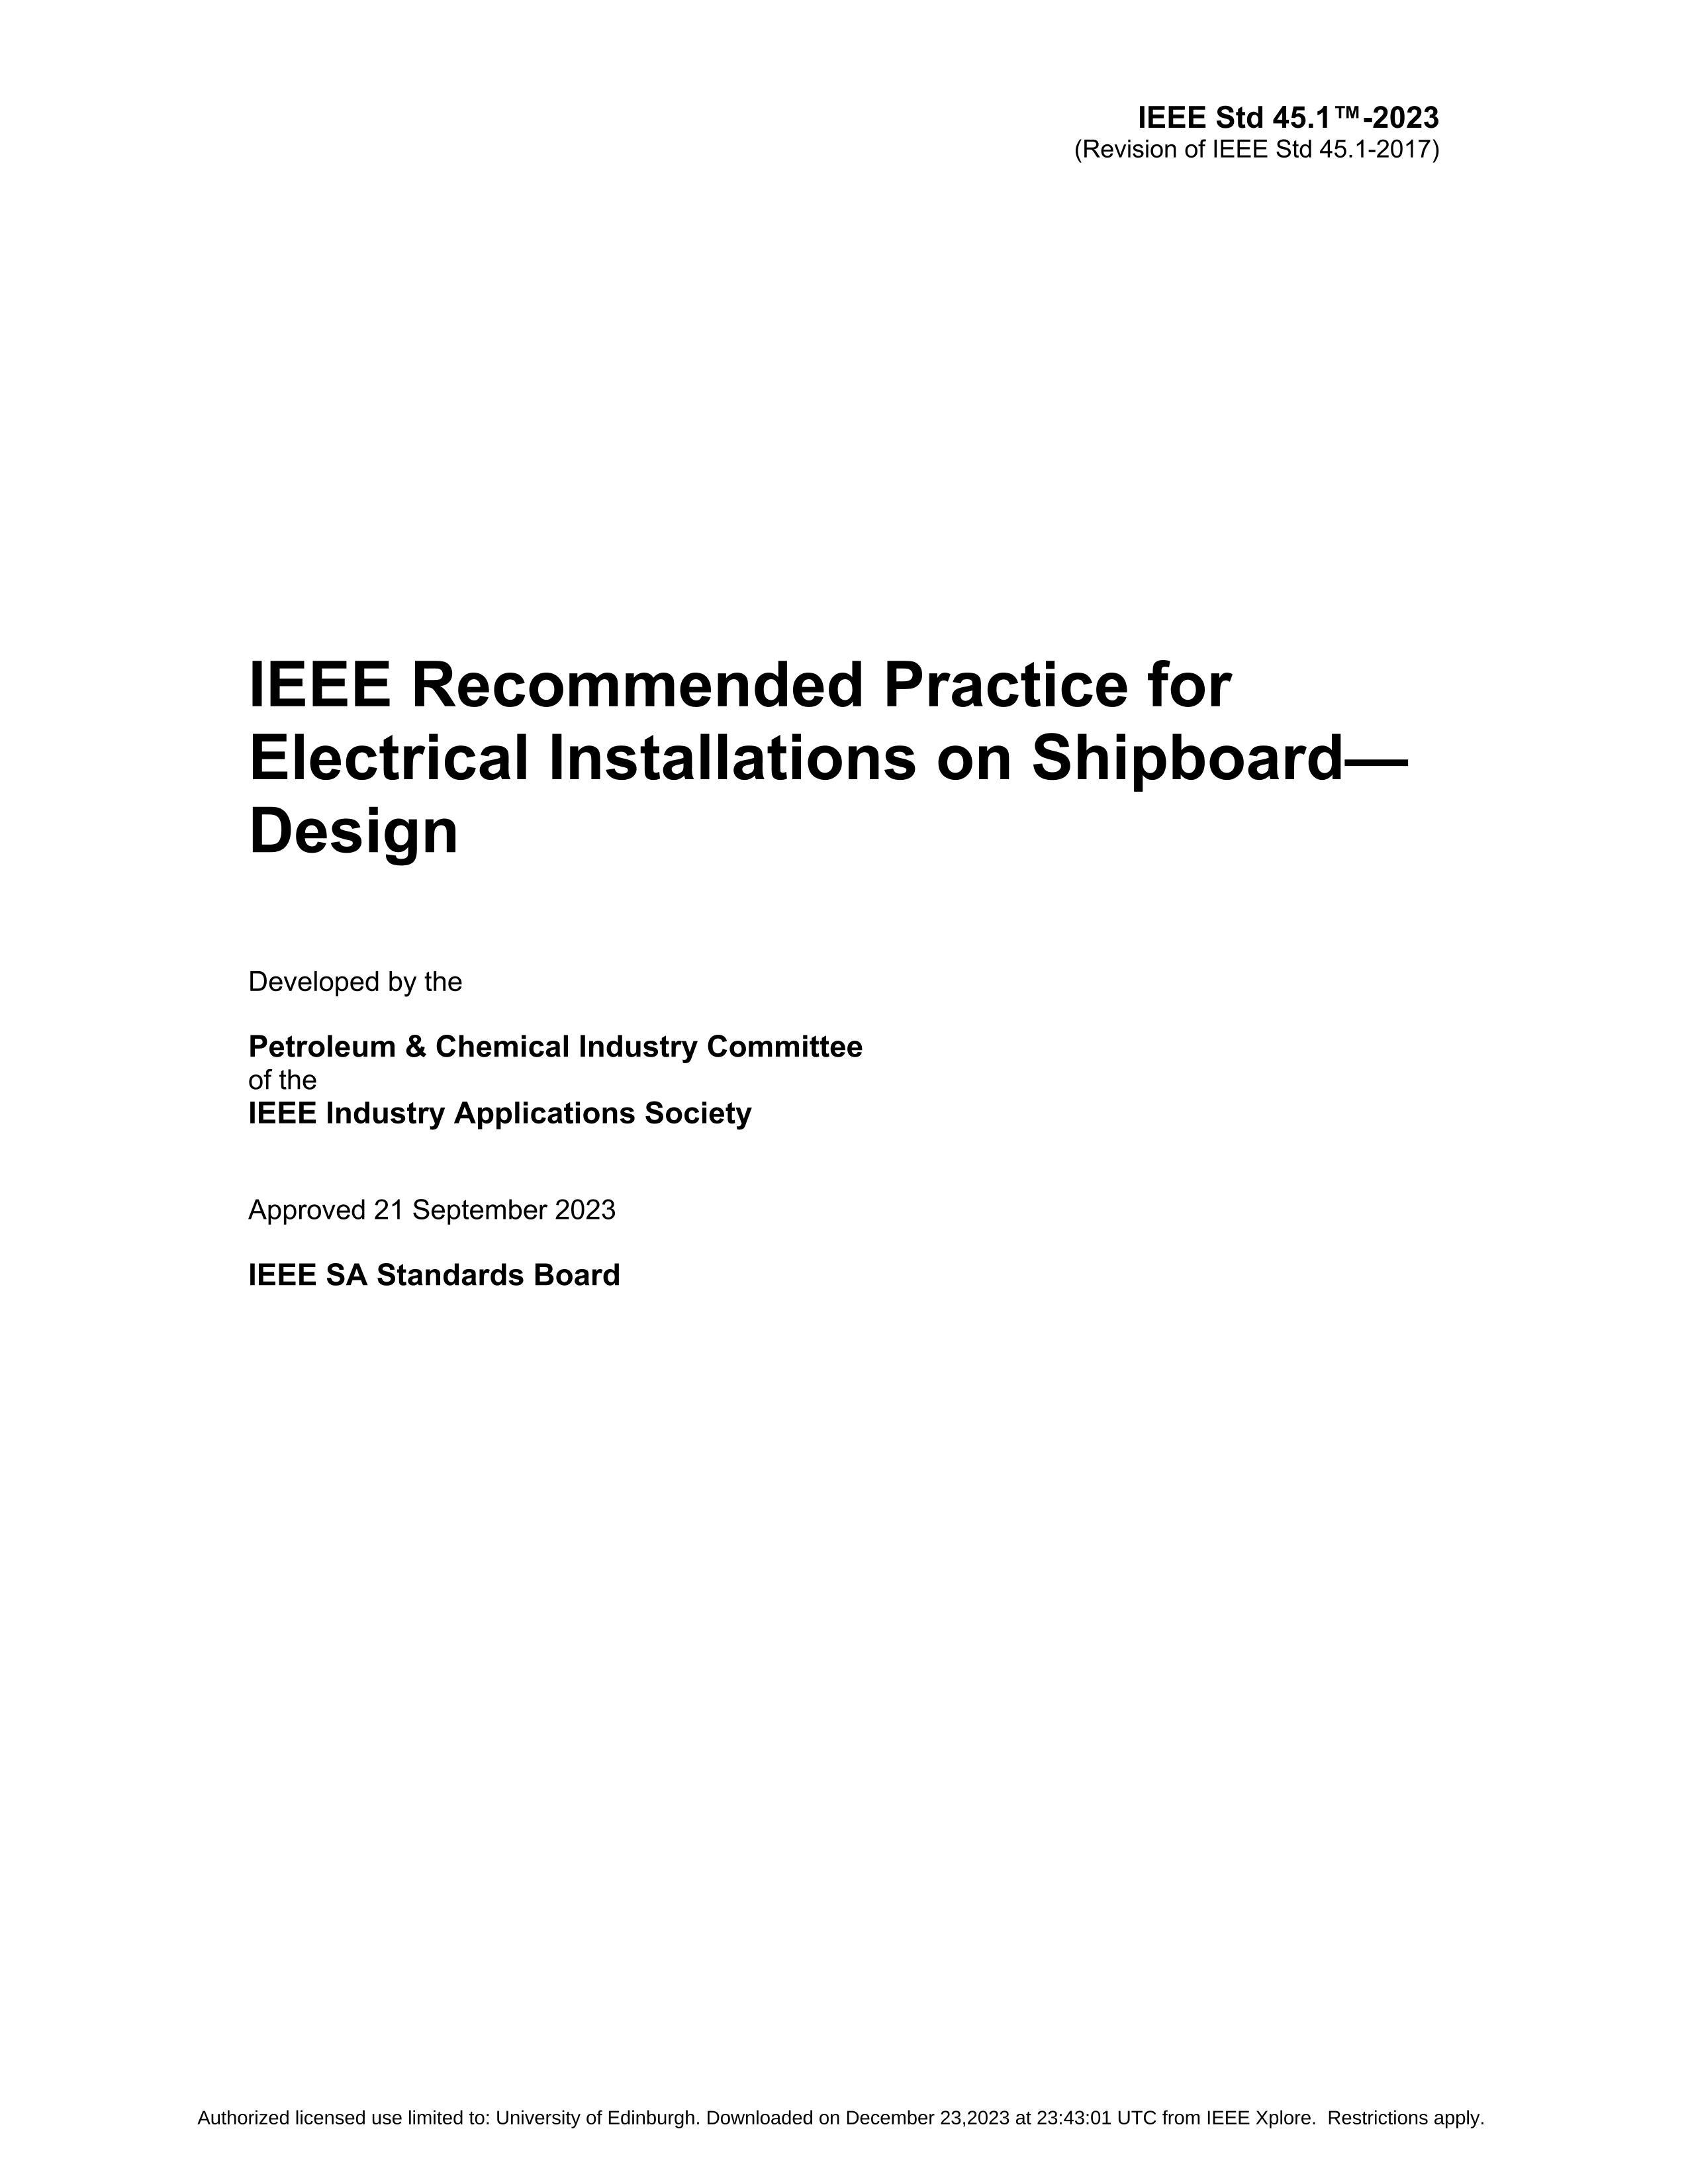 IEEE Std 45.1-2023 IEEE Recommended Practice for Electrical Installations on Shipboard  Design .pdf2ҳ